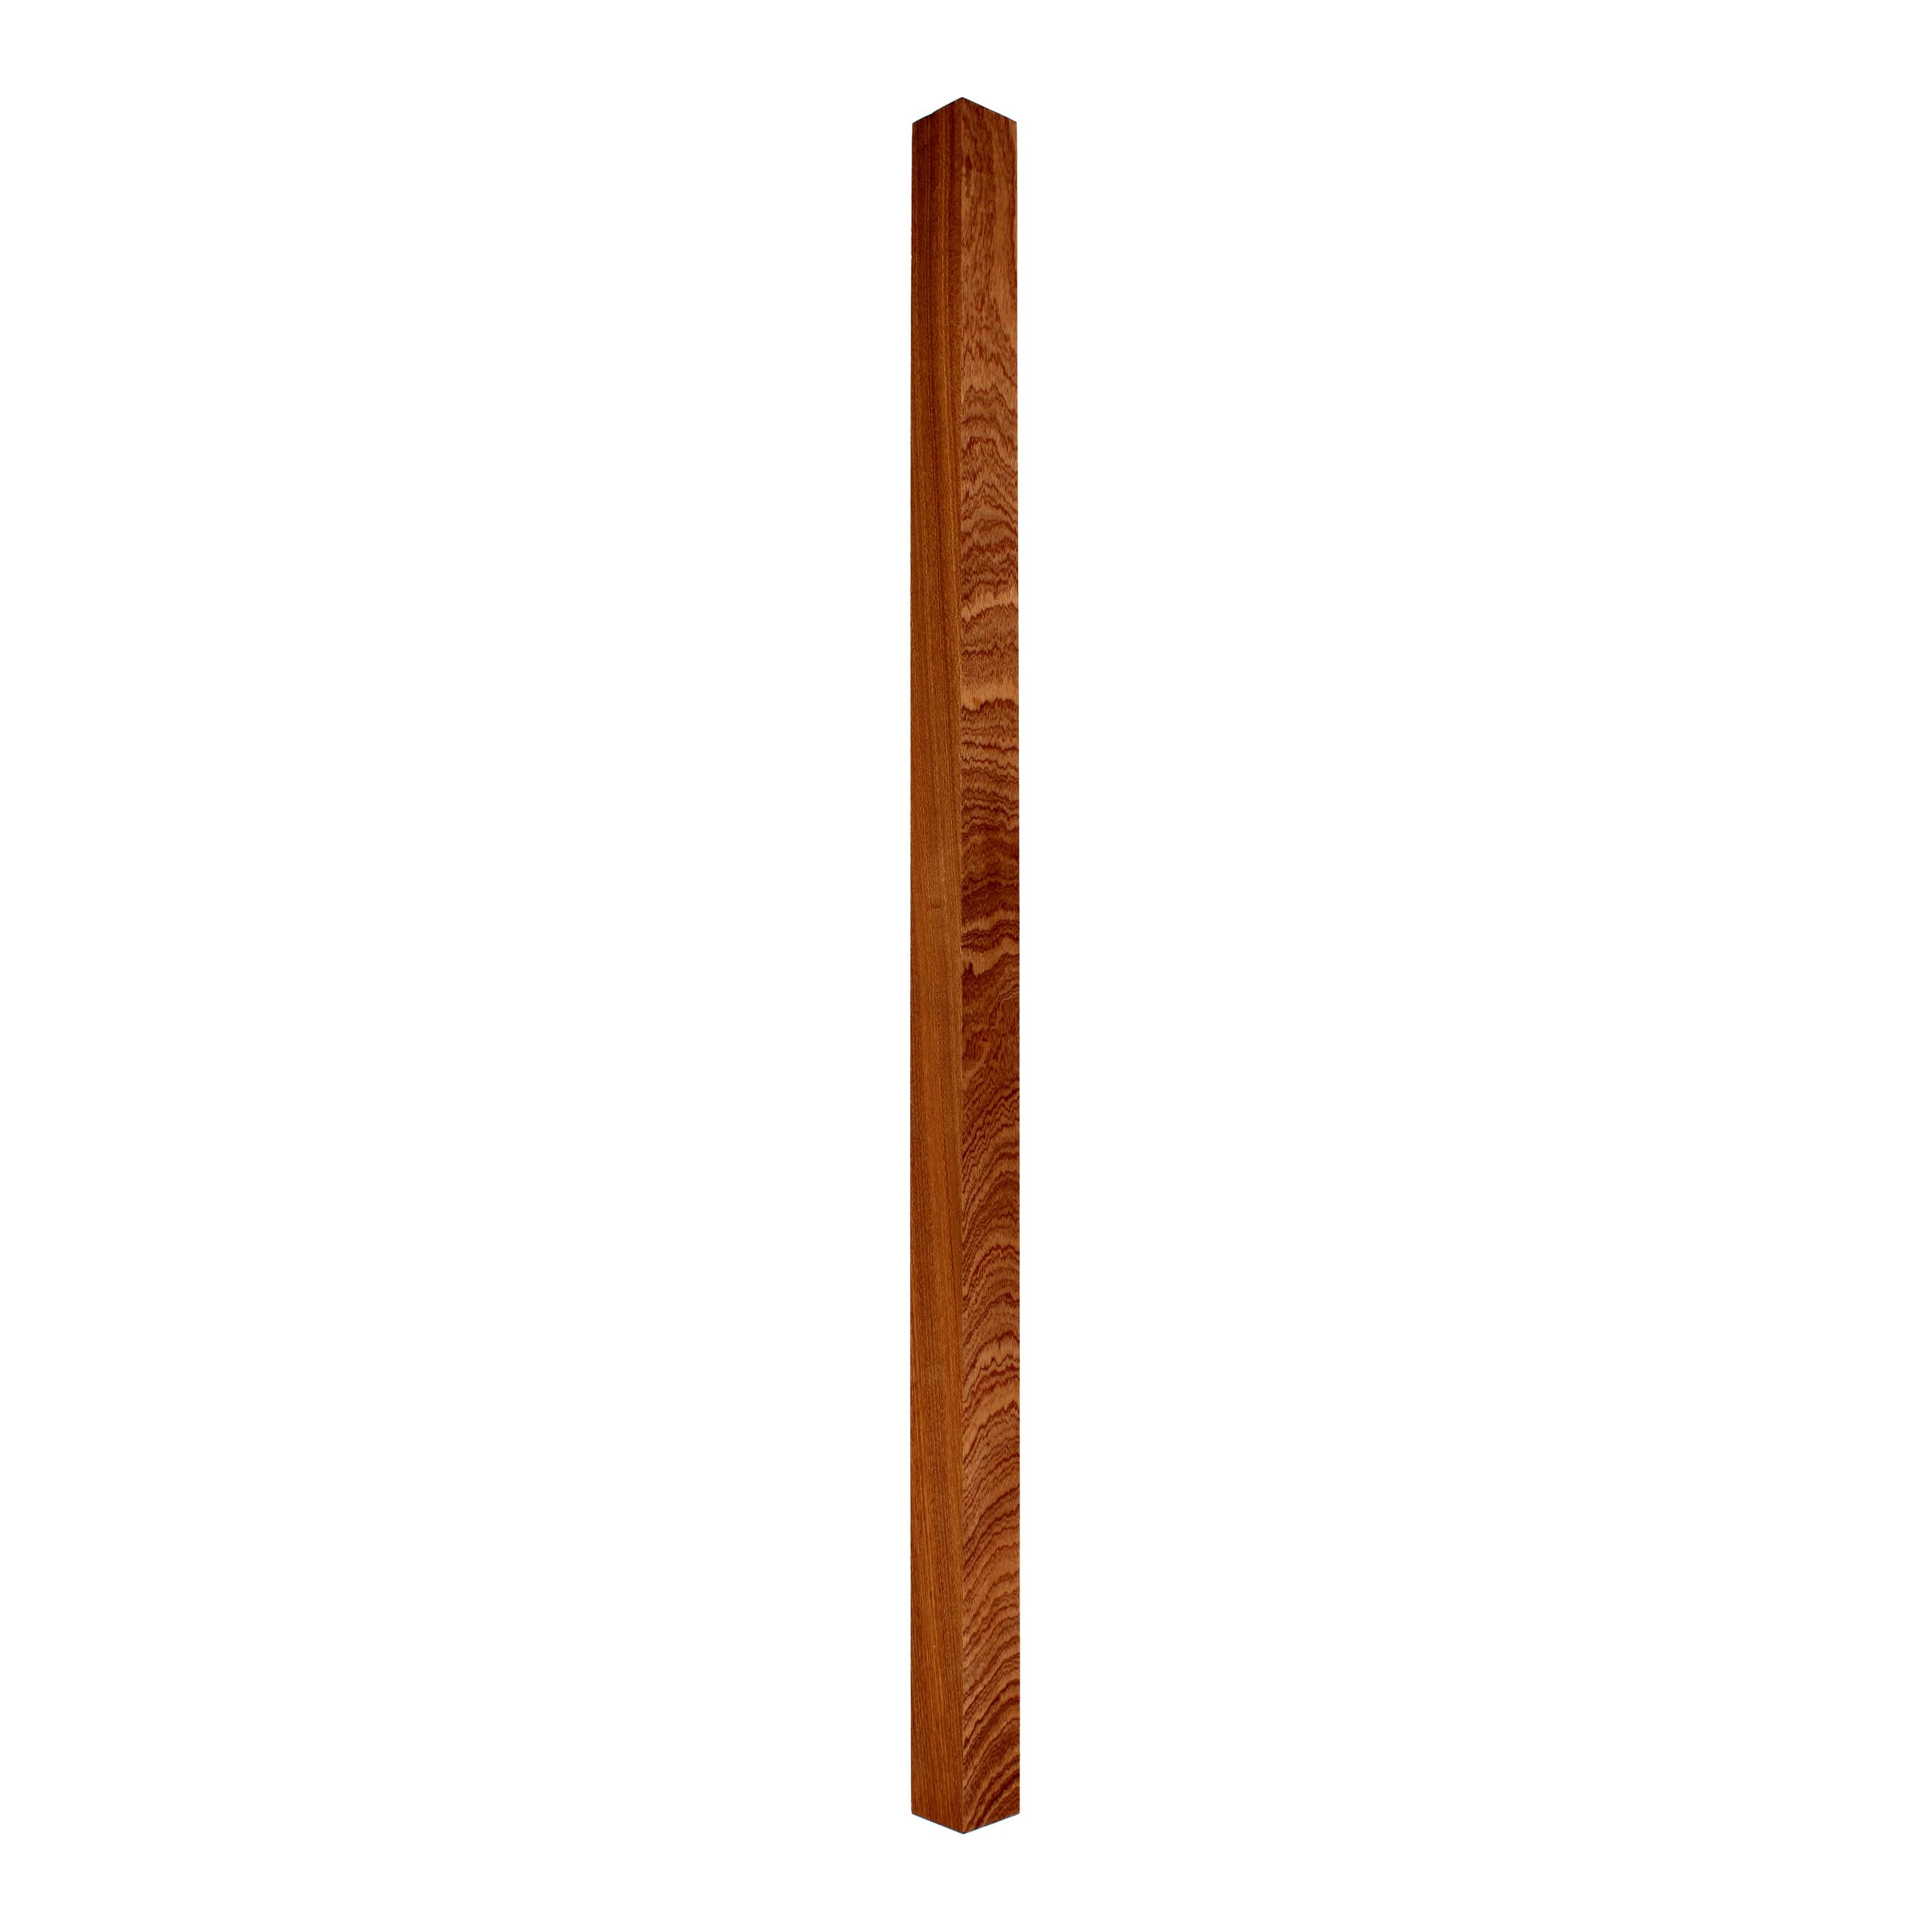 Mahogany-Square-41mm x 900 - Wooden staircase spindle.